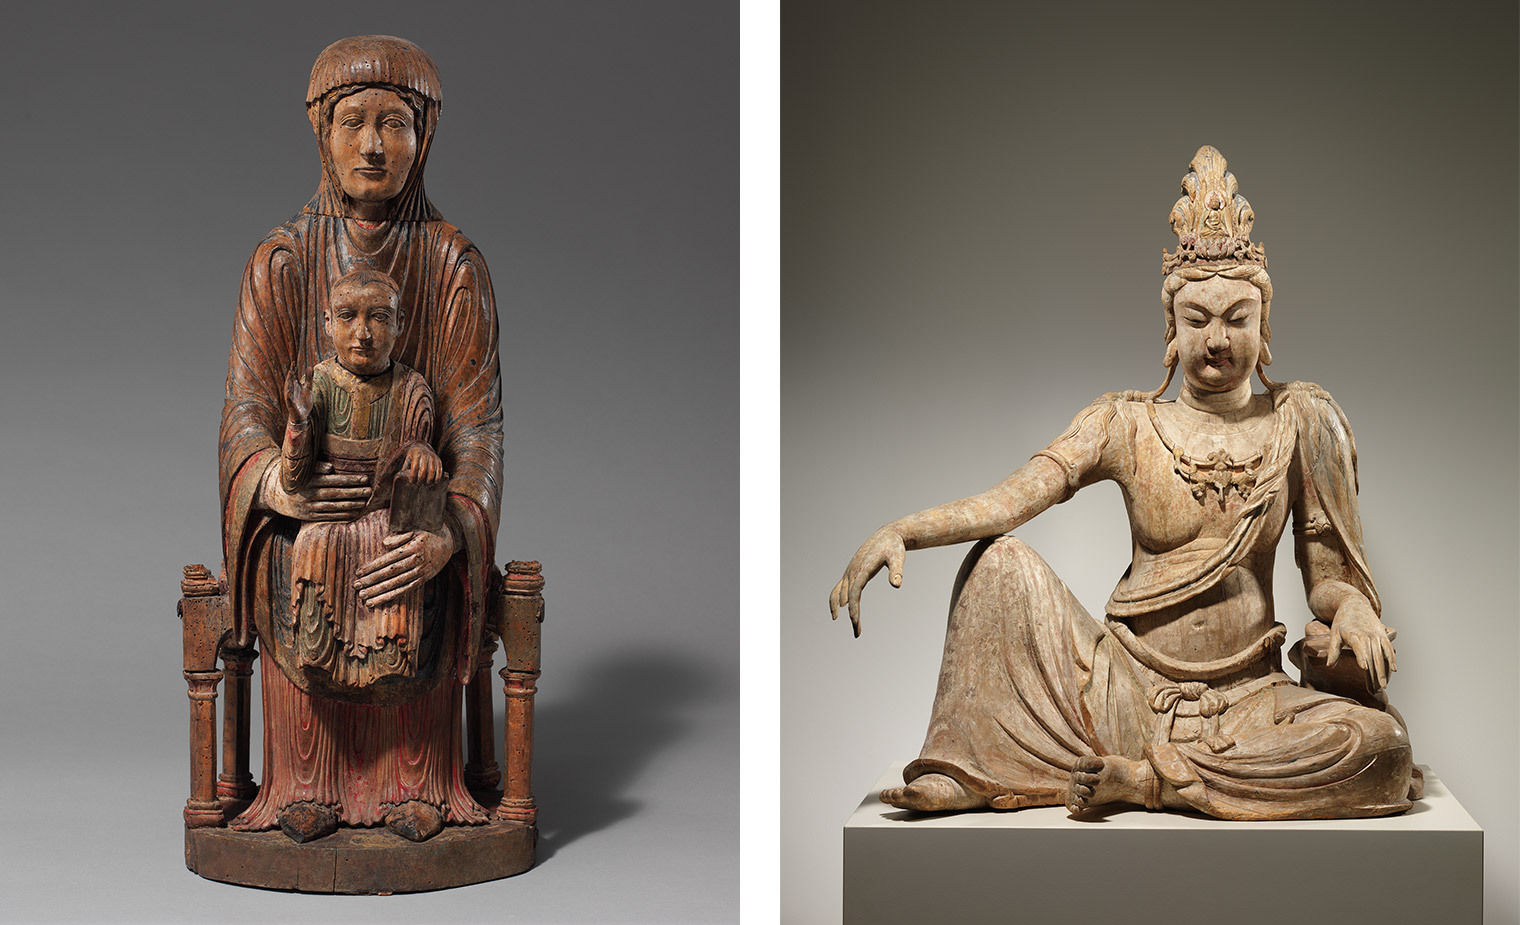 Left: A wooden sculpture of a woman holding an infant child. Right: A stone sculpture of a lounging figure